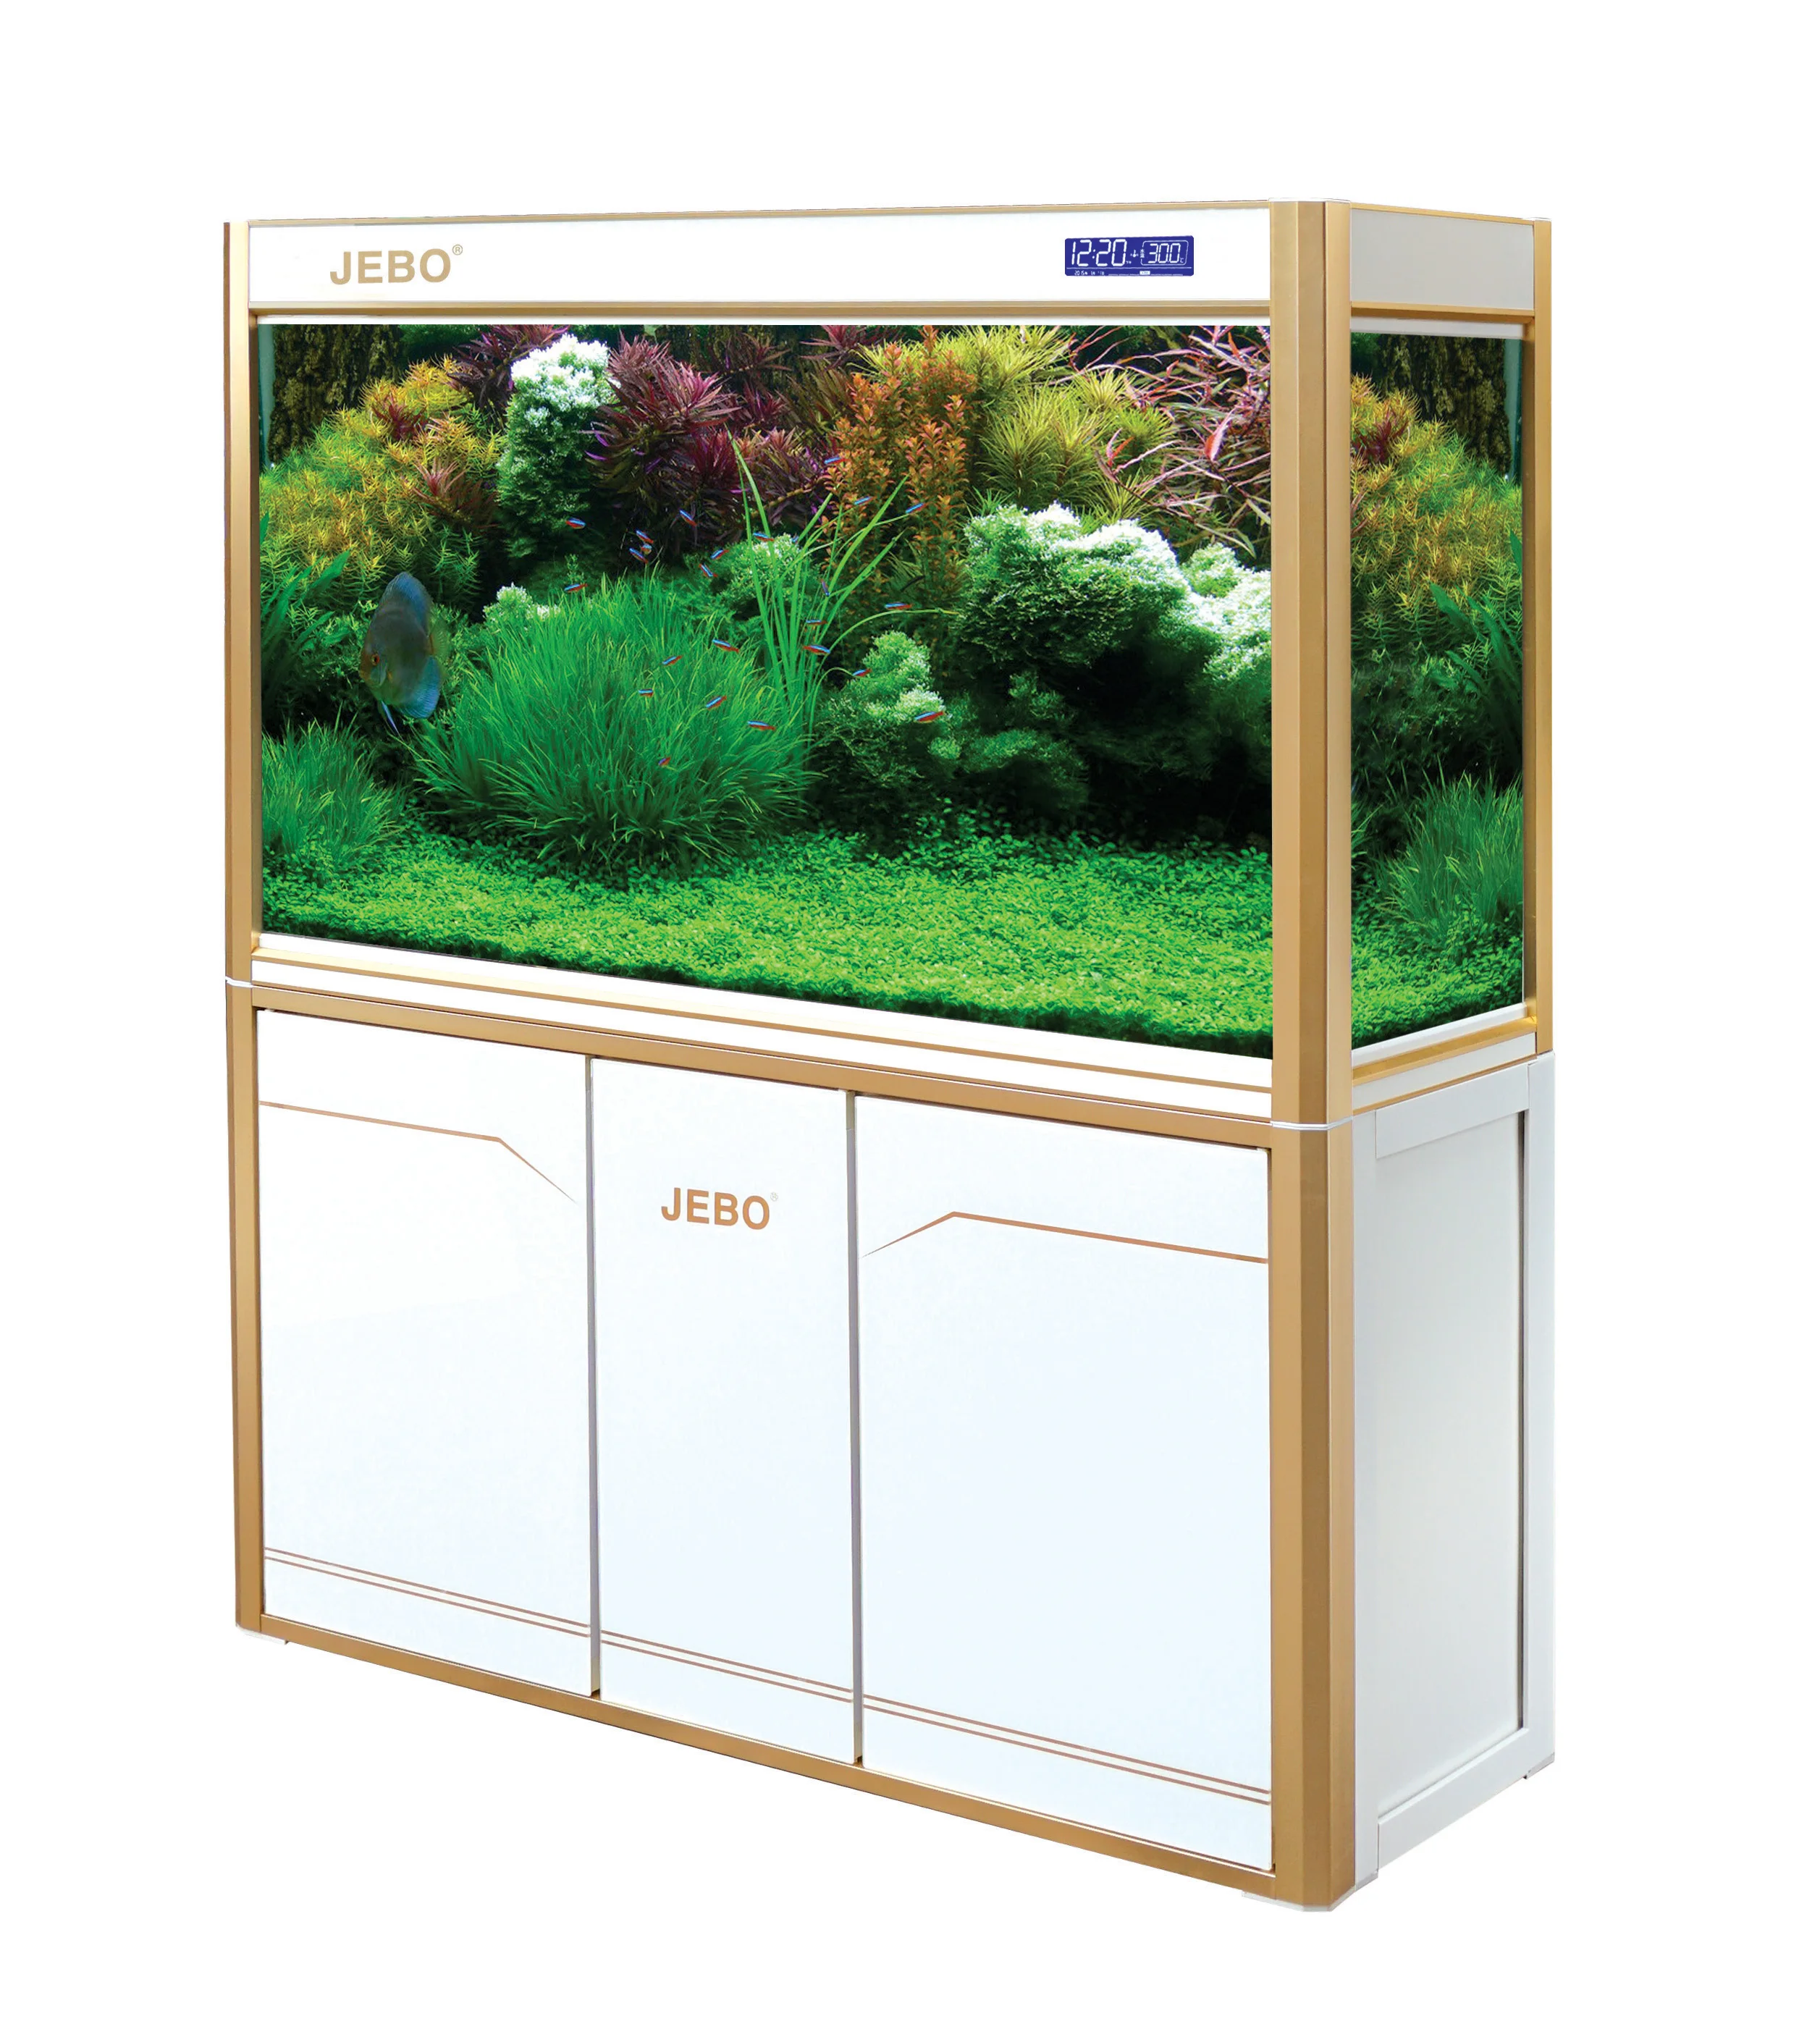 Zwaaien herfst Overtuiging Trending Hot Products Jebo Cheap Fish Tanks - Buy Cheap Fish Tanks,Cheap  Fish Tanks,Cheap Fish Tanks Product on Alibaba.com